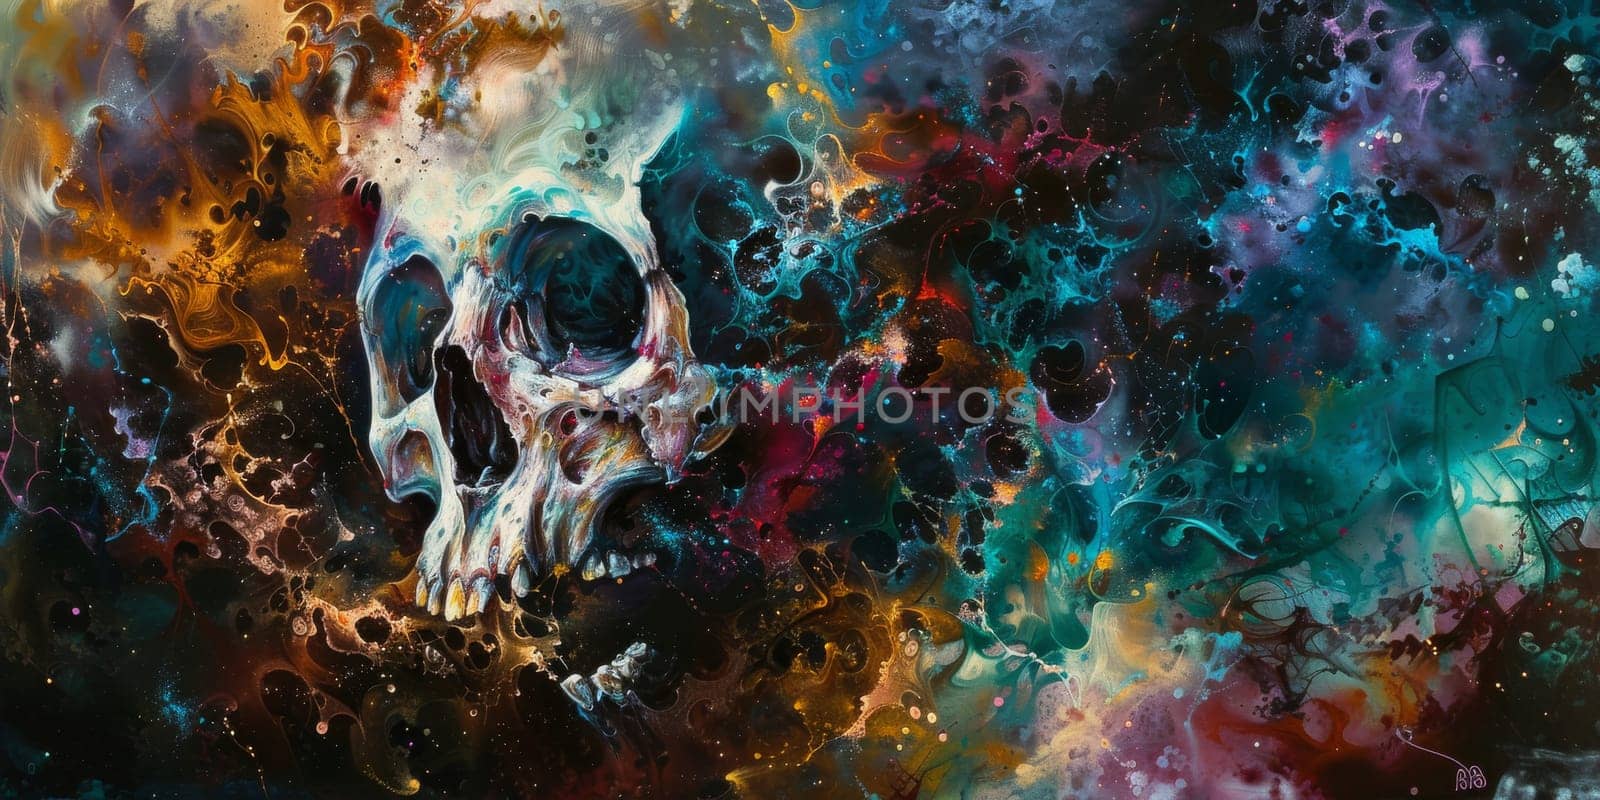 A painting of a skull against vibrant, colorful backdrop